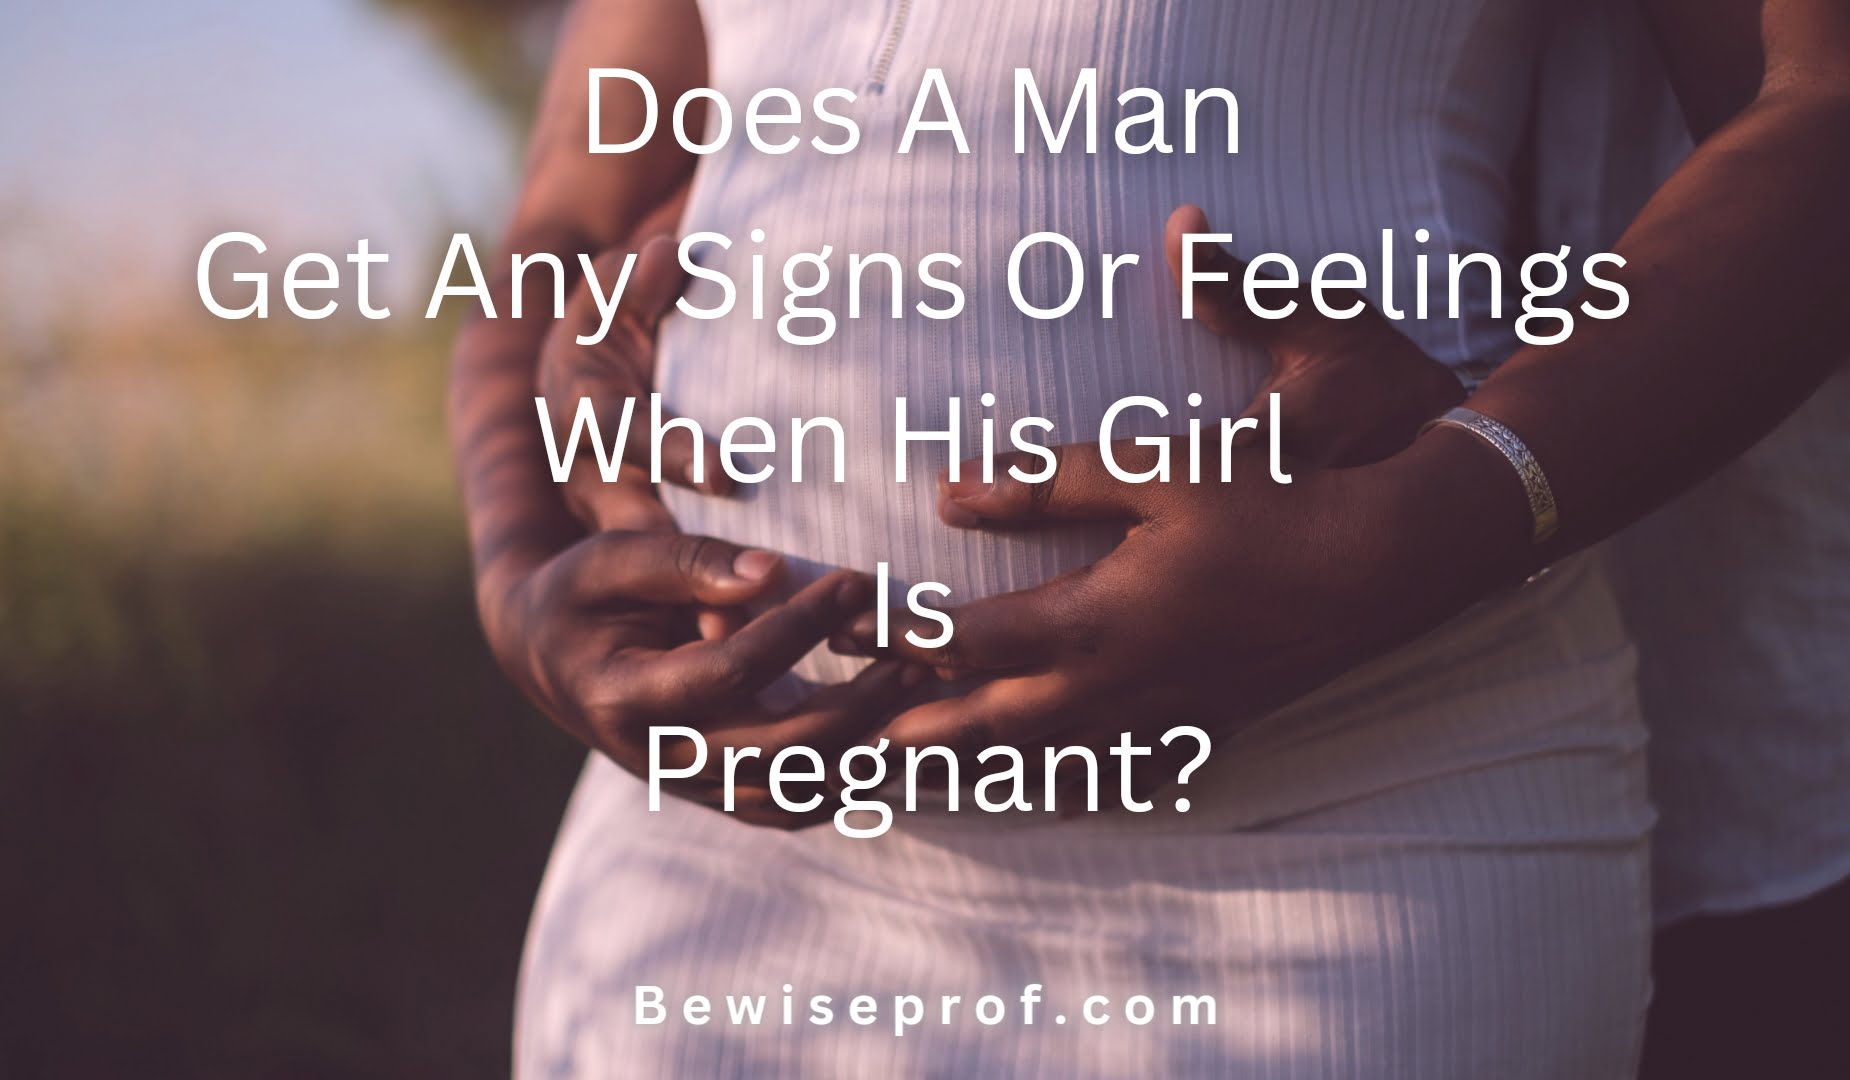 Does A Man Get Any Signs Or Feelings When His Girl Is Pregnant?